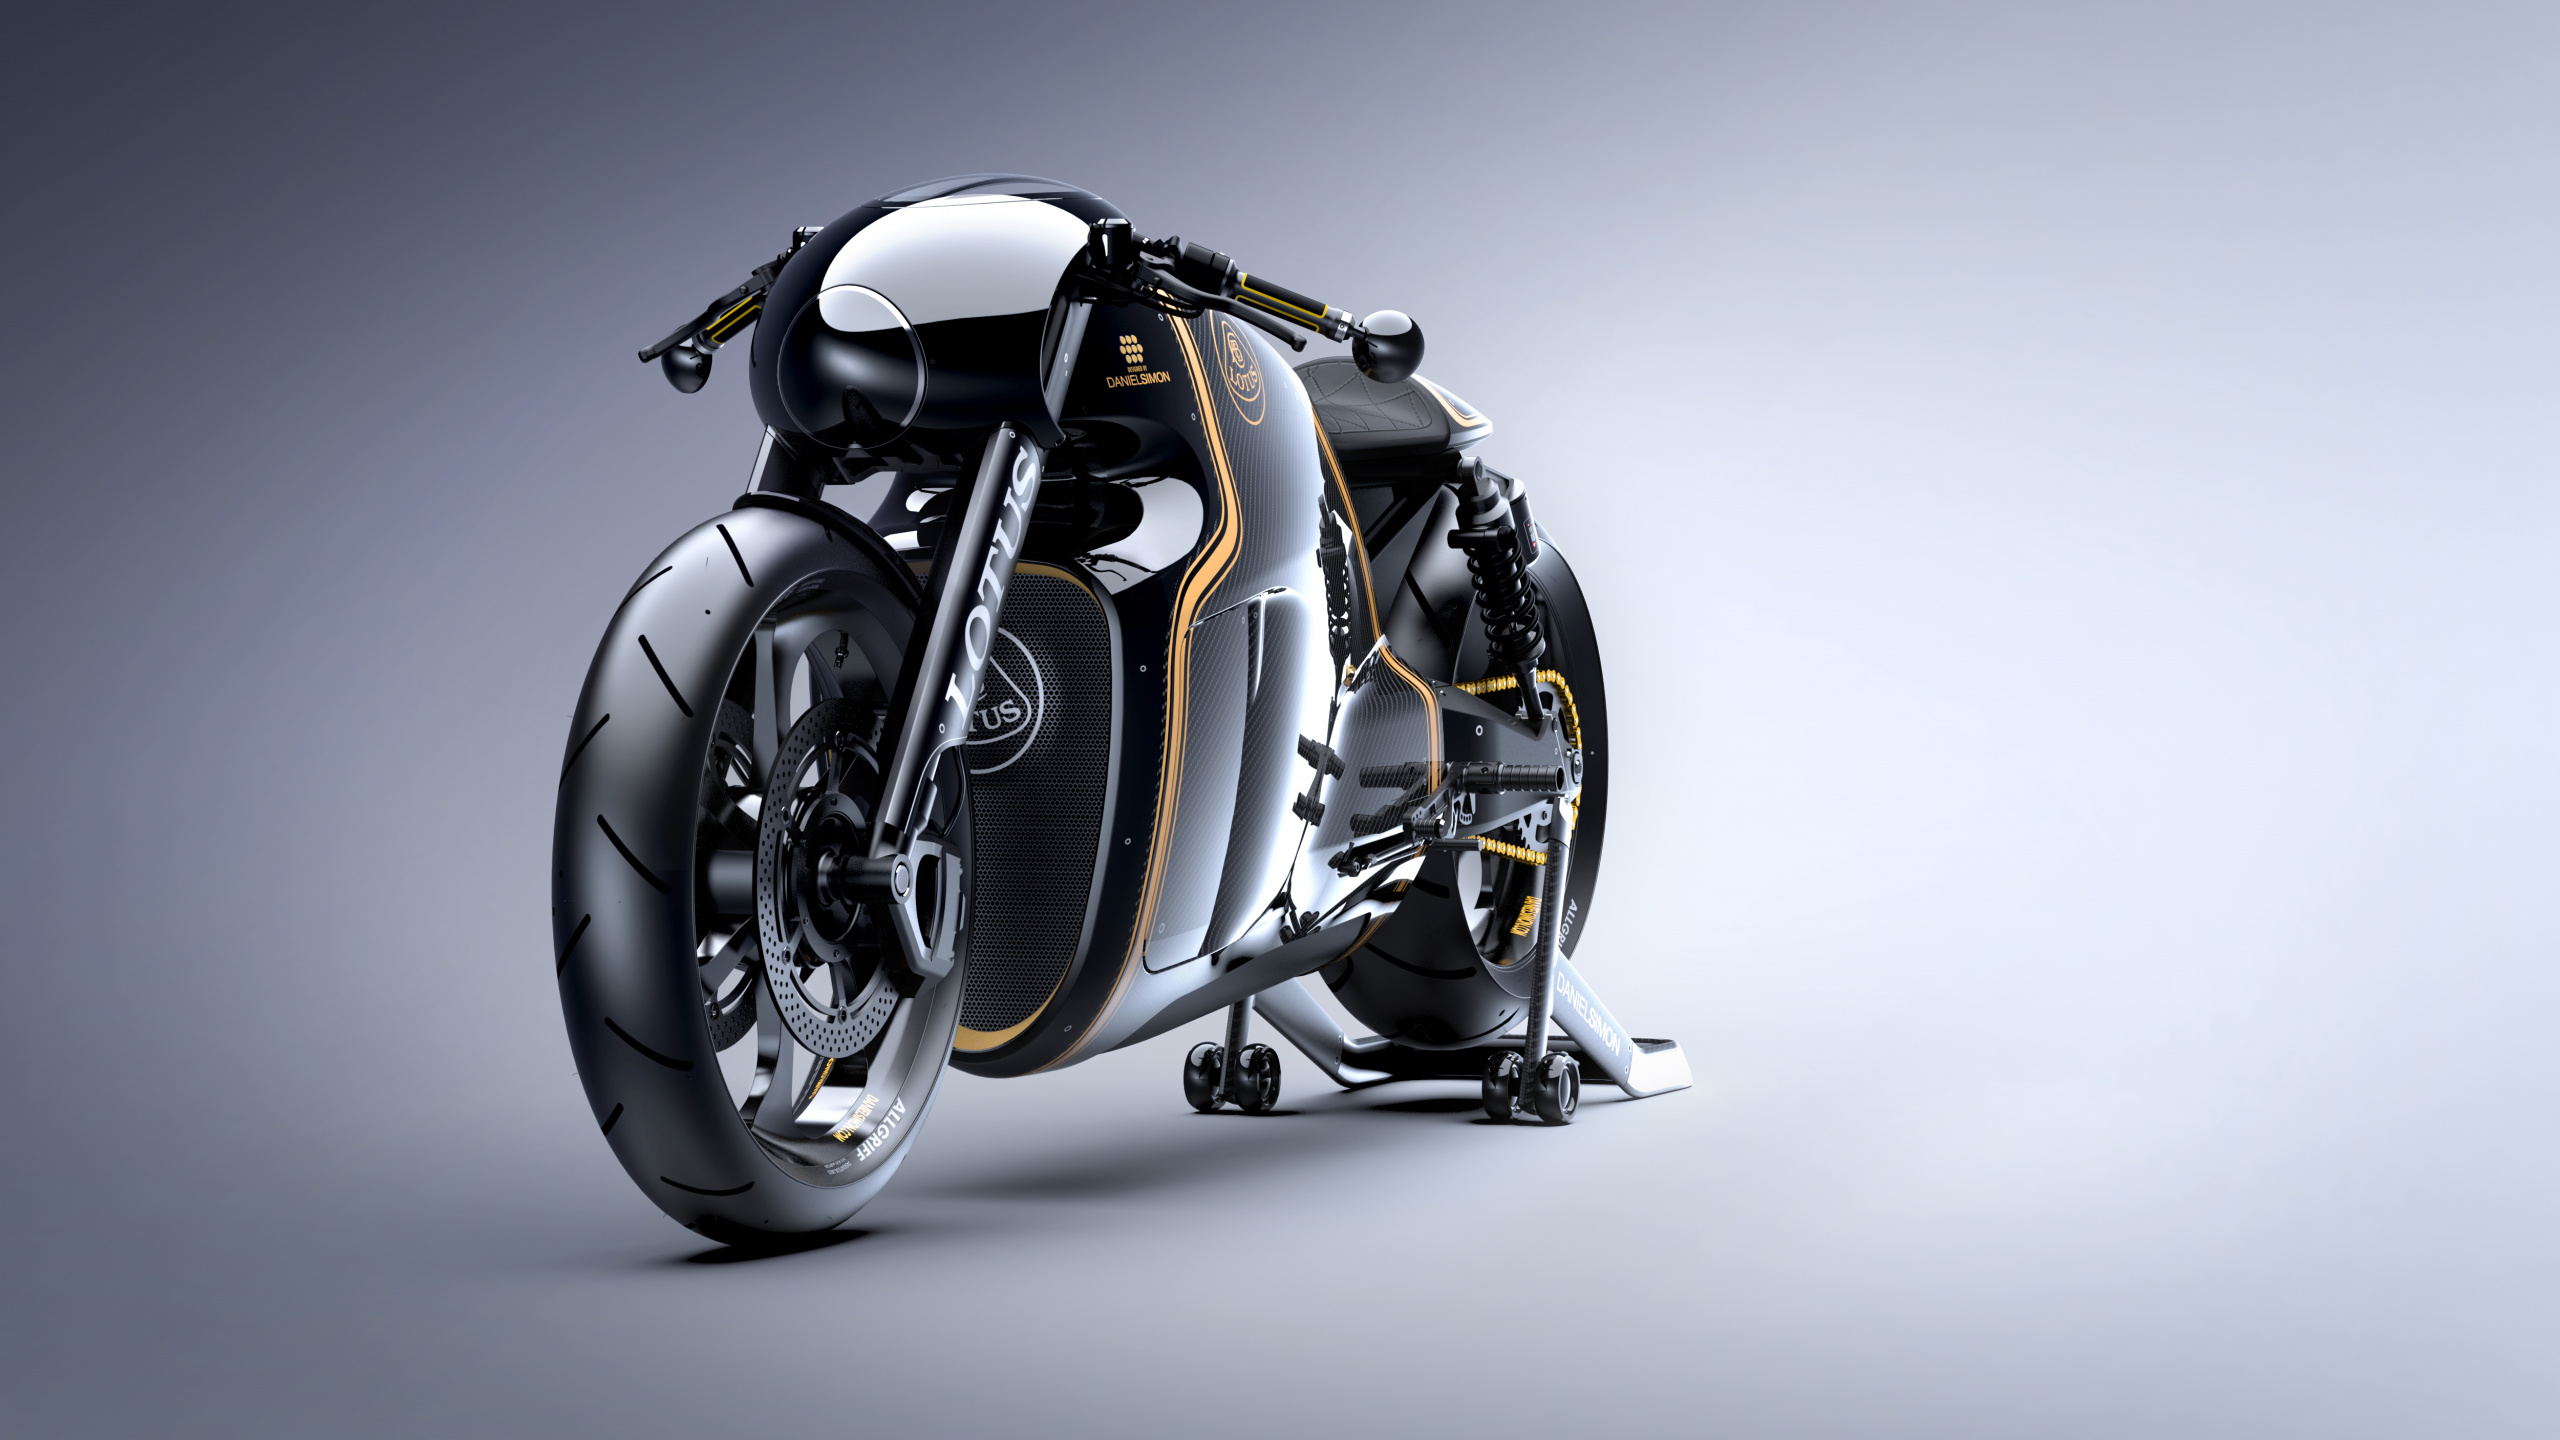 Black and Silver Sports Motorcycle. Wallpaper in 2560x1440 Resolution